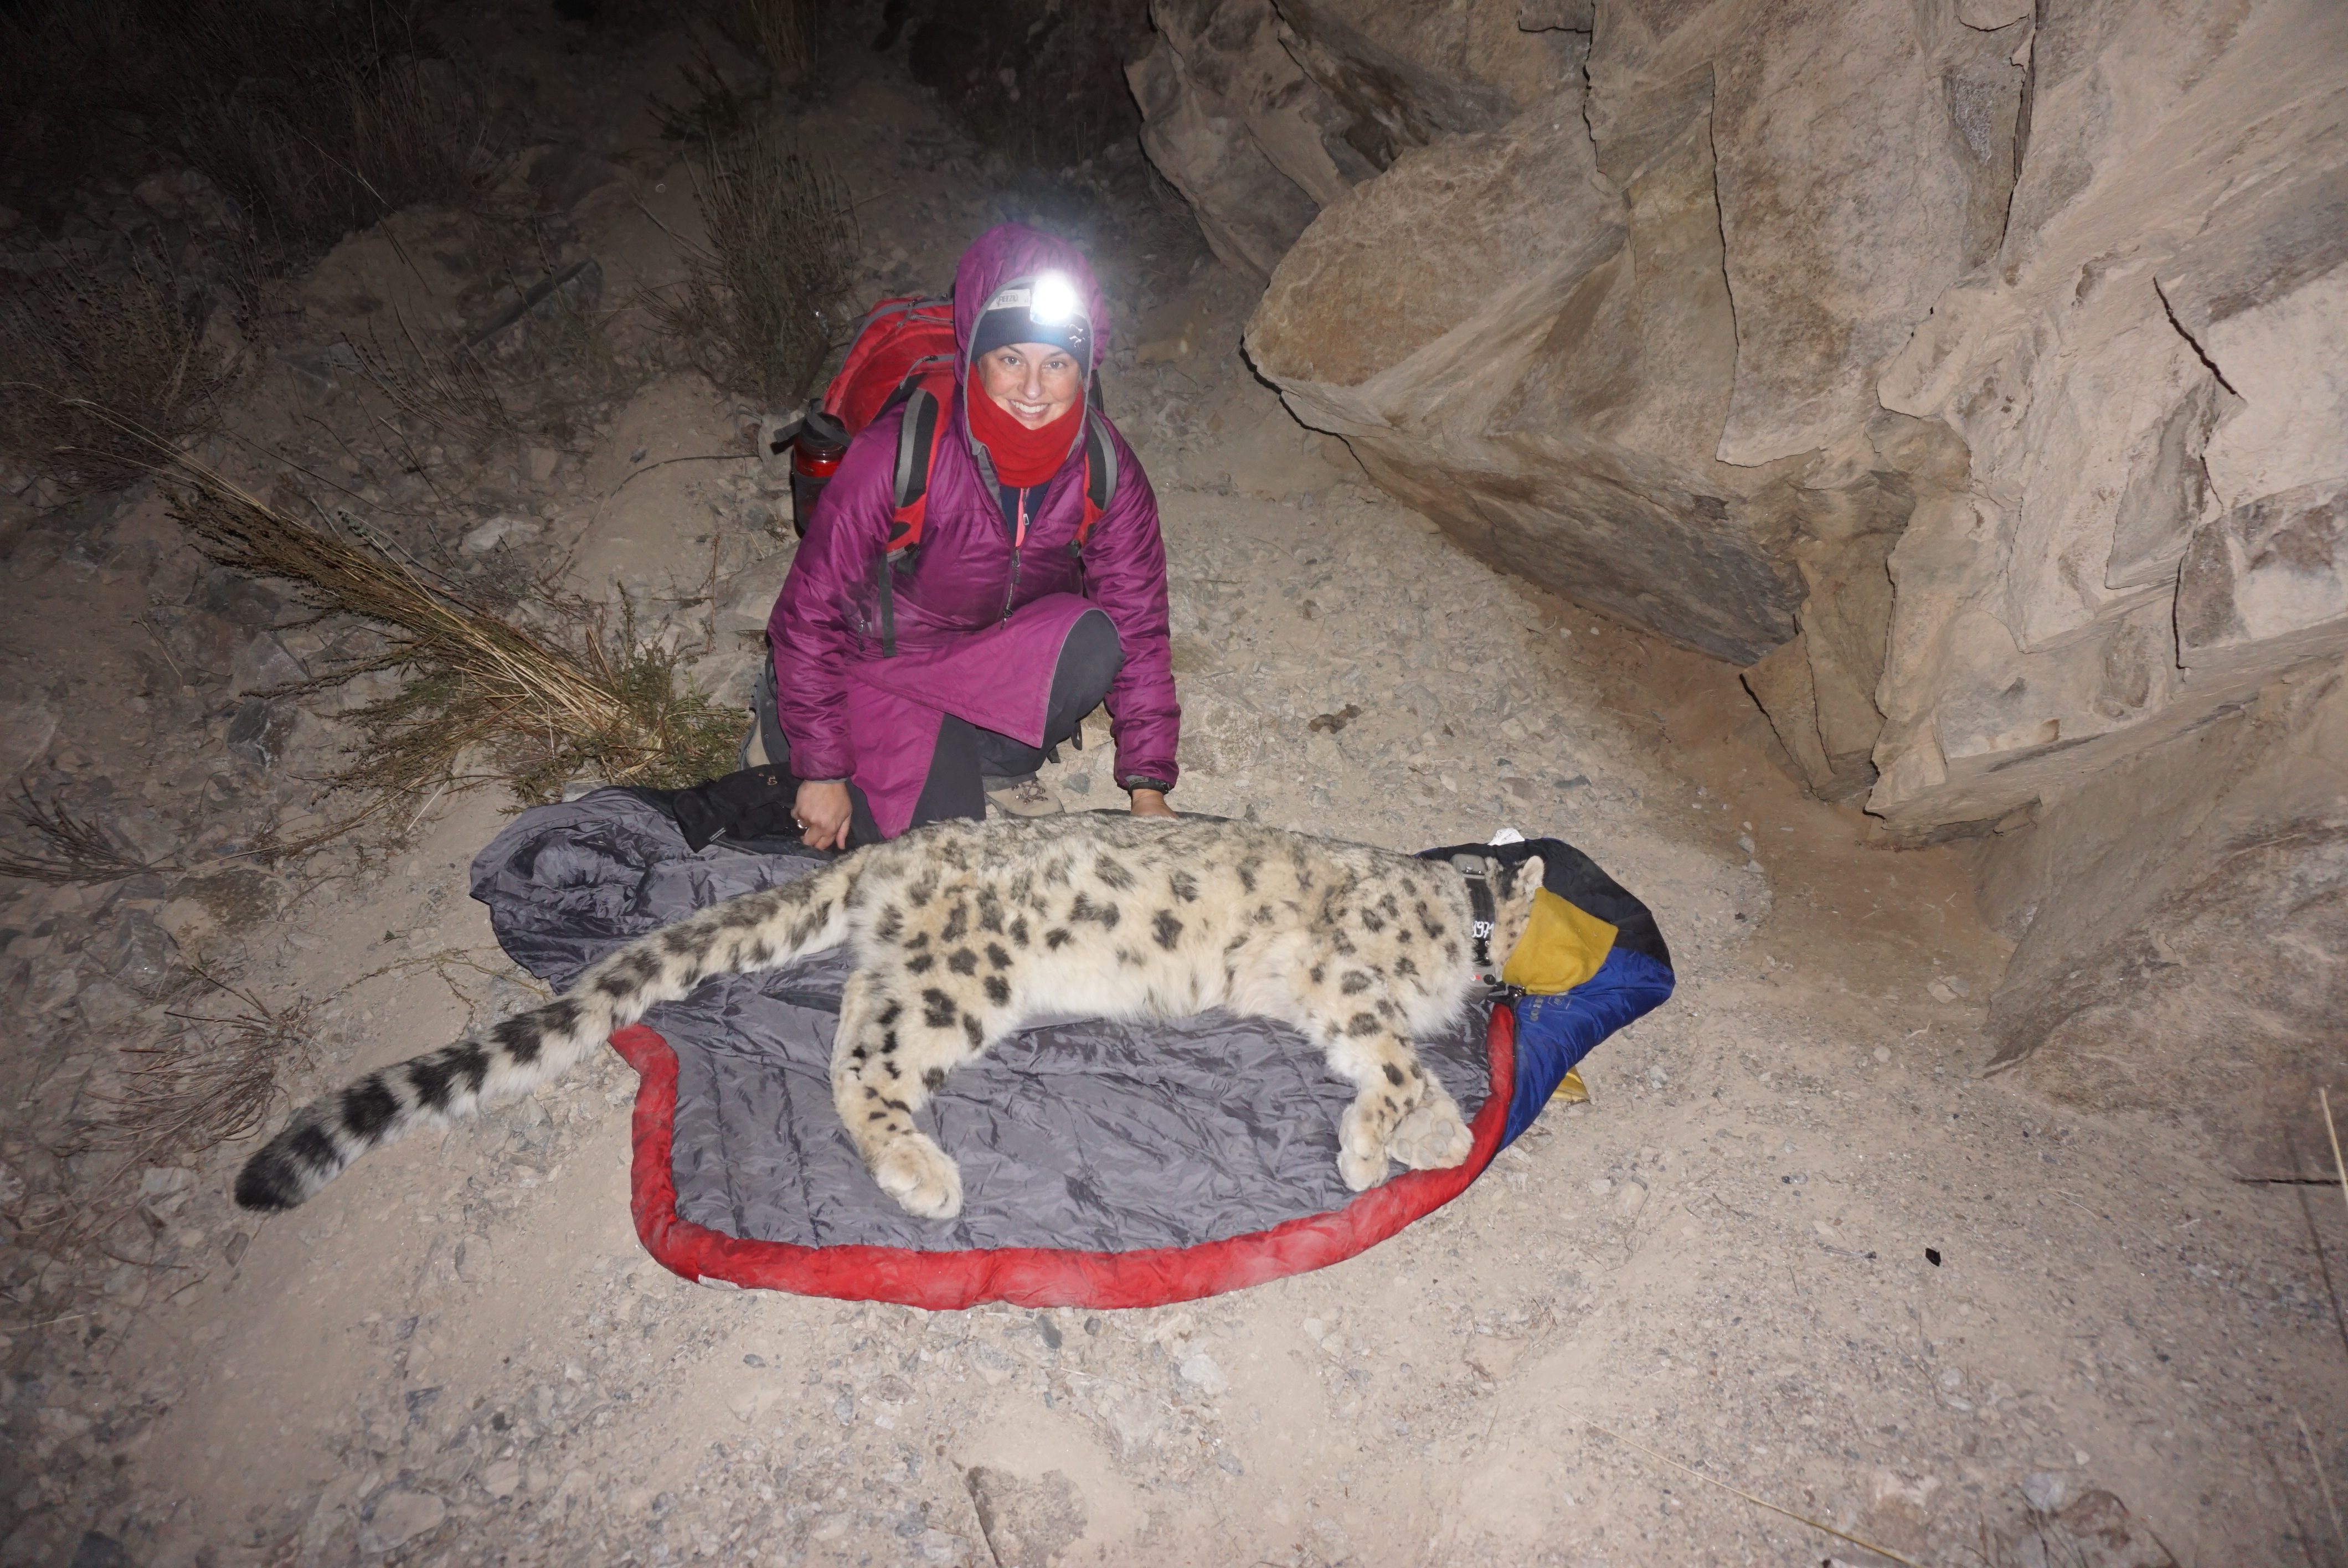 Scientists use a sedative to study this snow leopard, carefully monitoring its vitals the entire time.